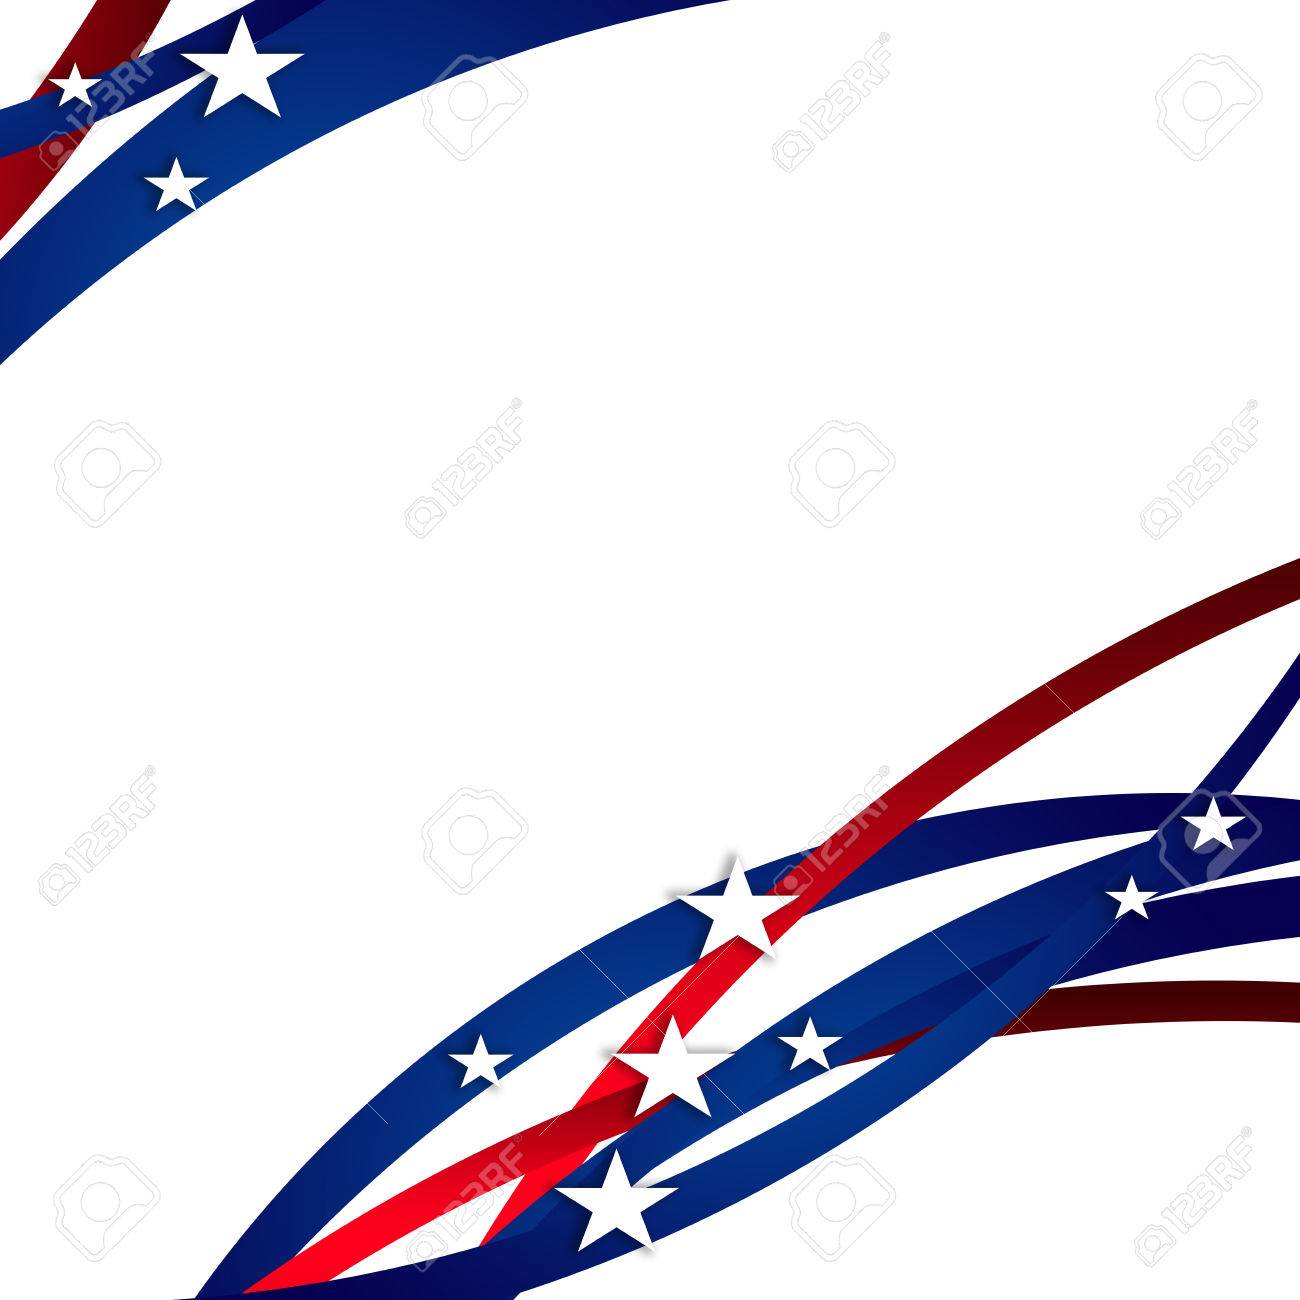 President Day Background With Red White And Blue Colors Stock